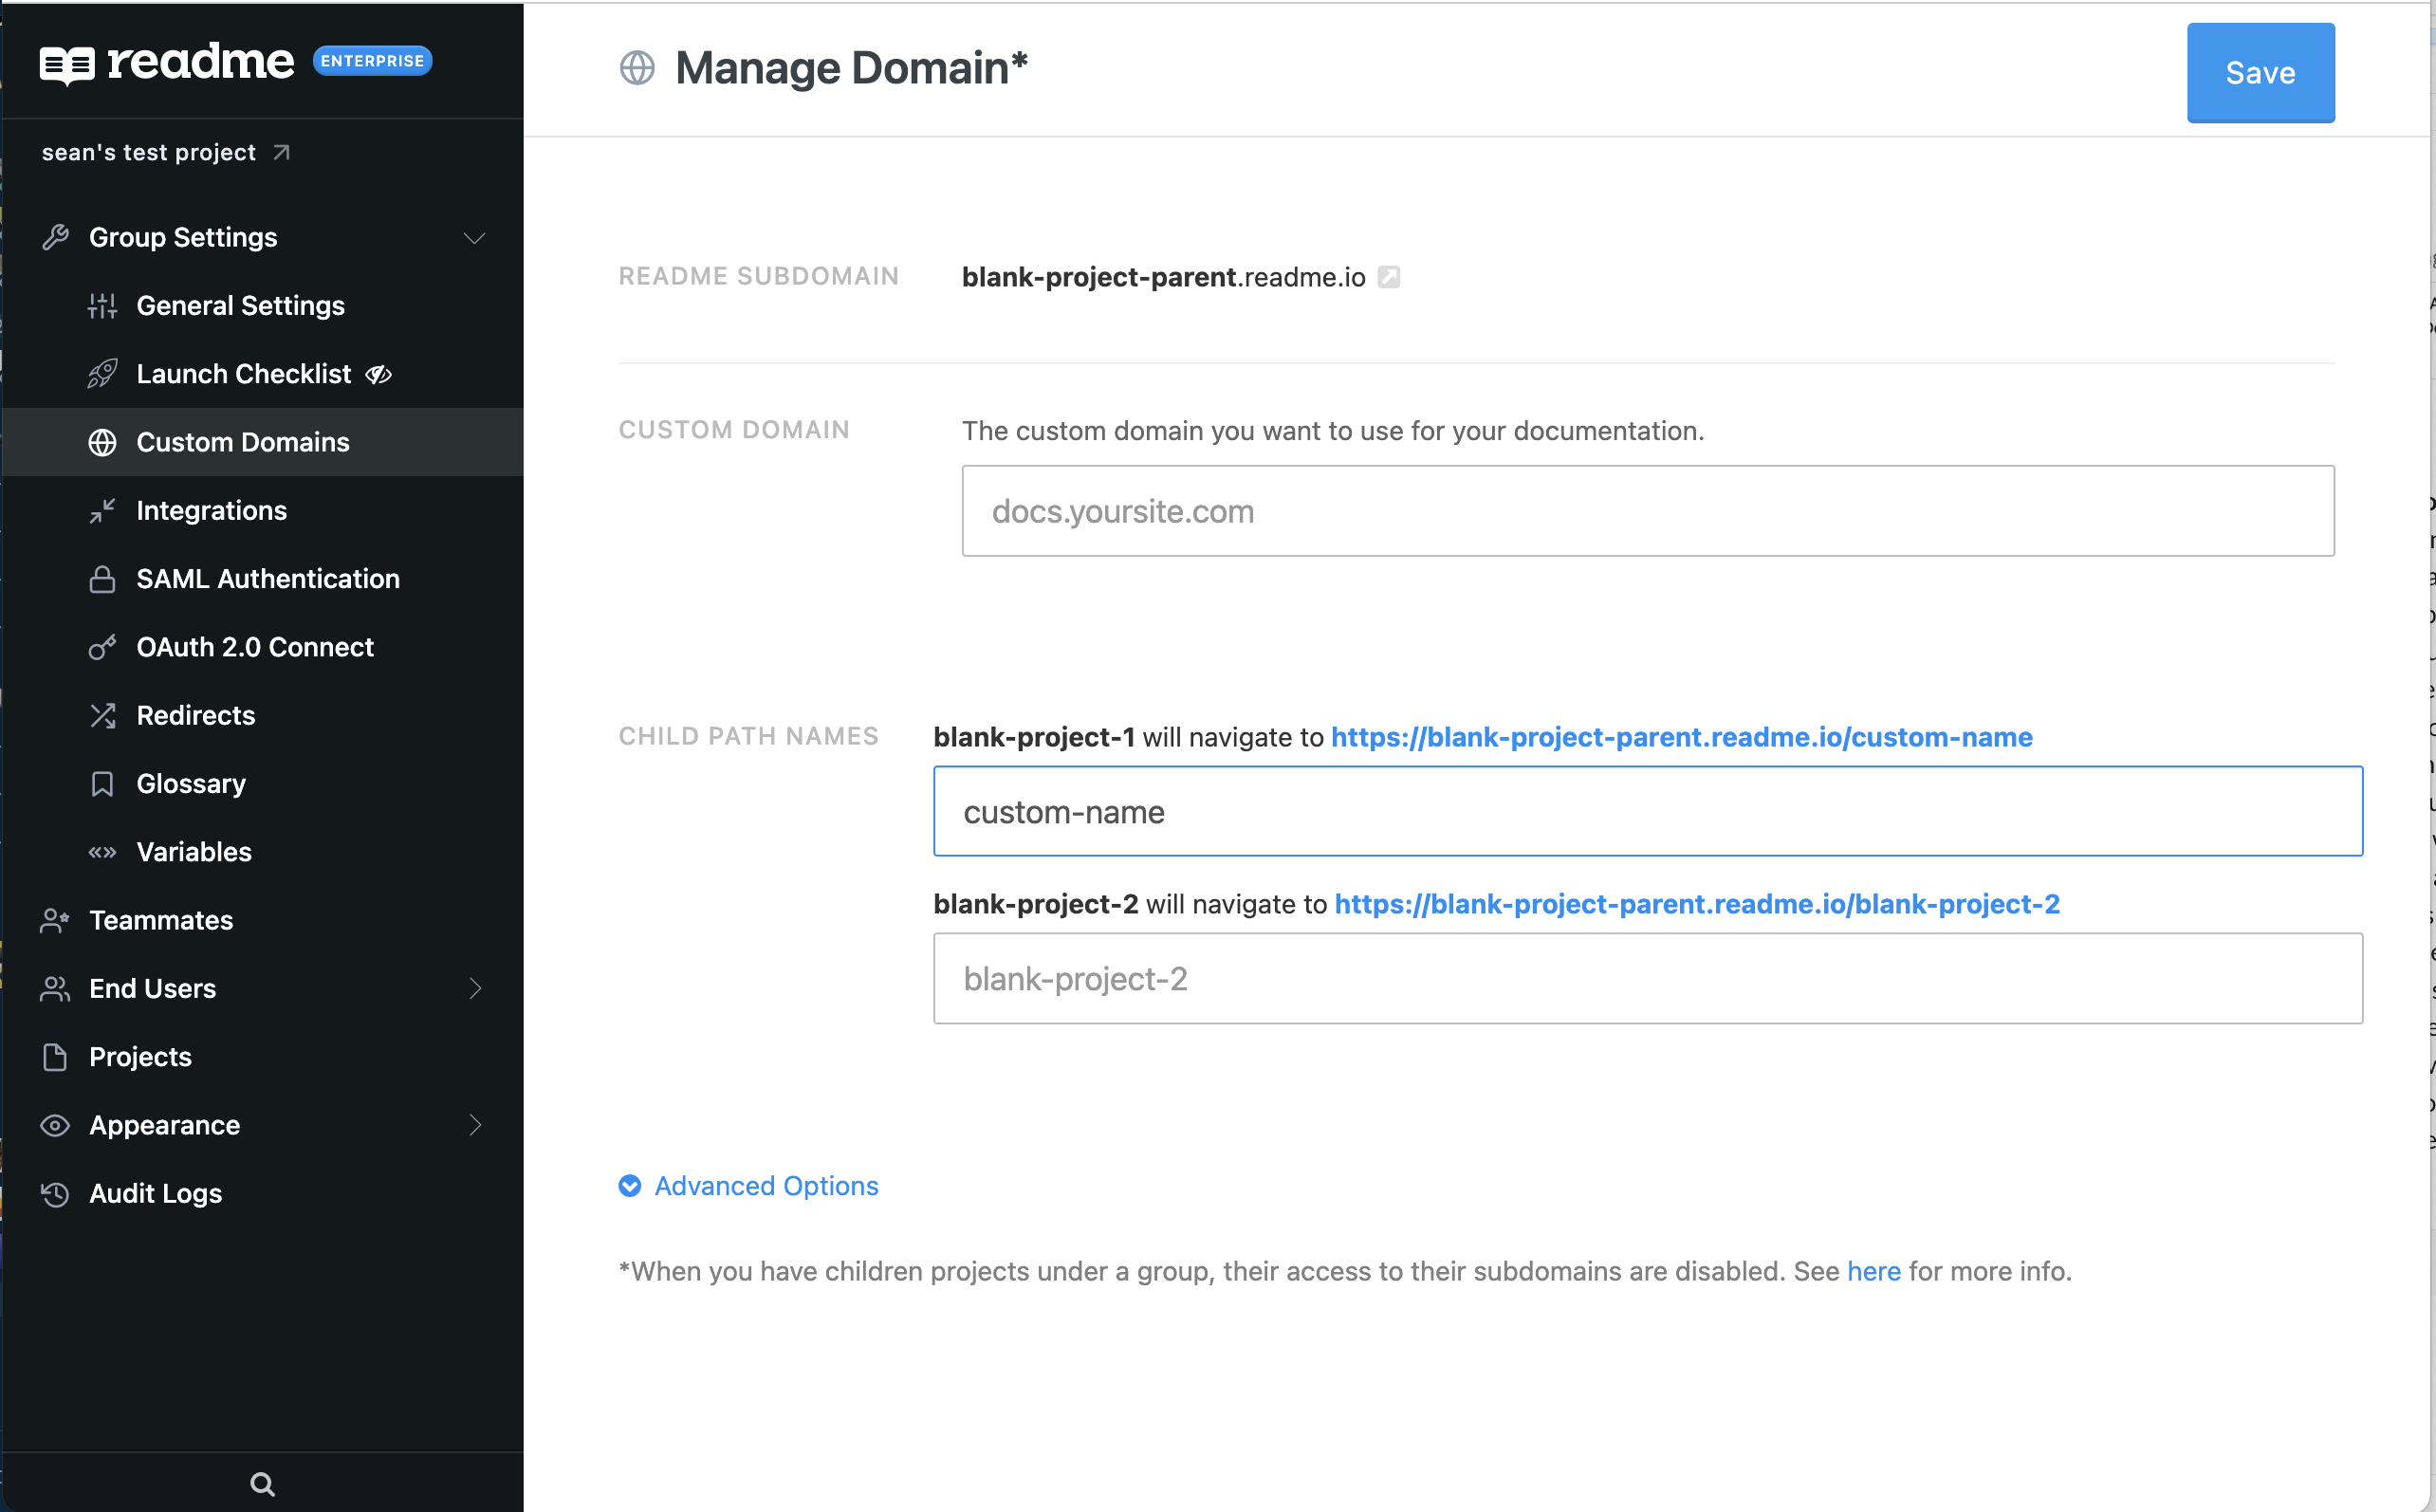 Domain settings page in the Enterprise dashboard. In the Child Path Names section, `custom-name` is specified for the first project's child path.